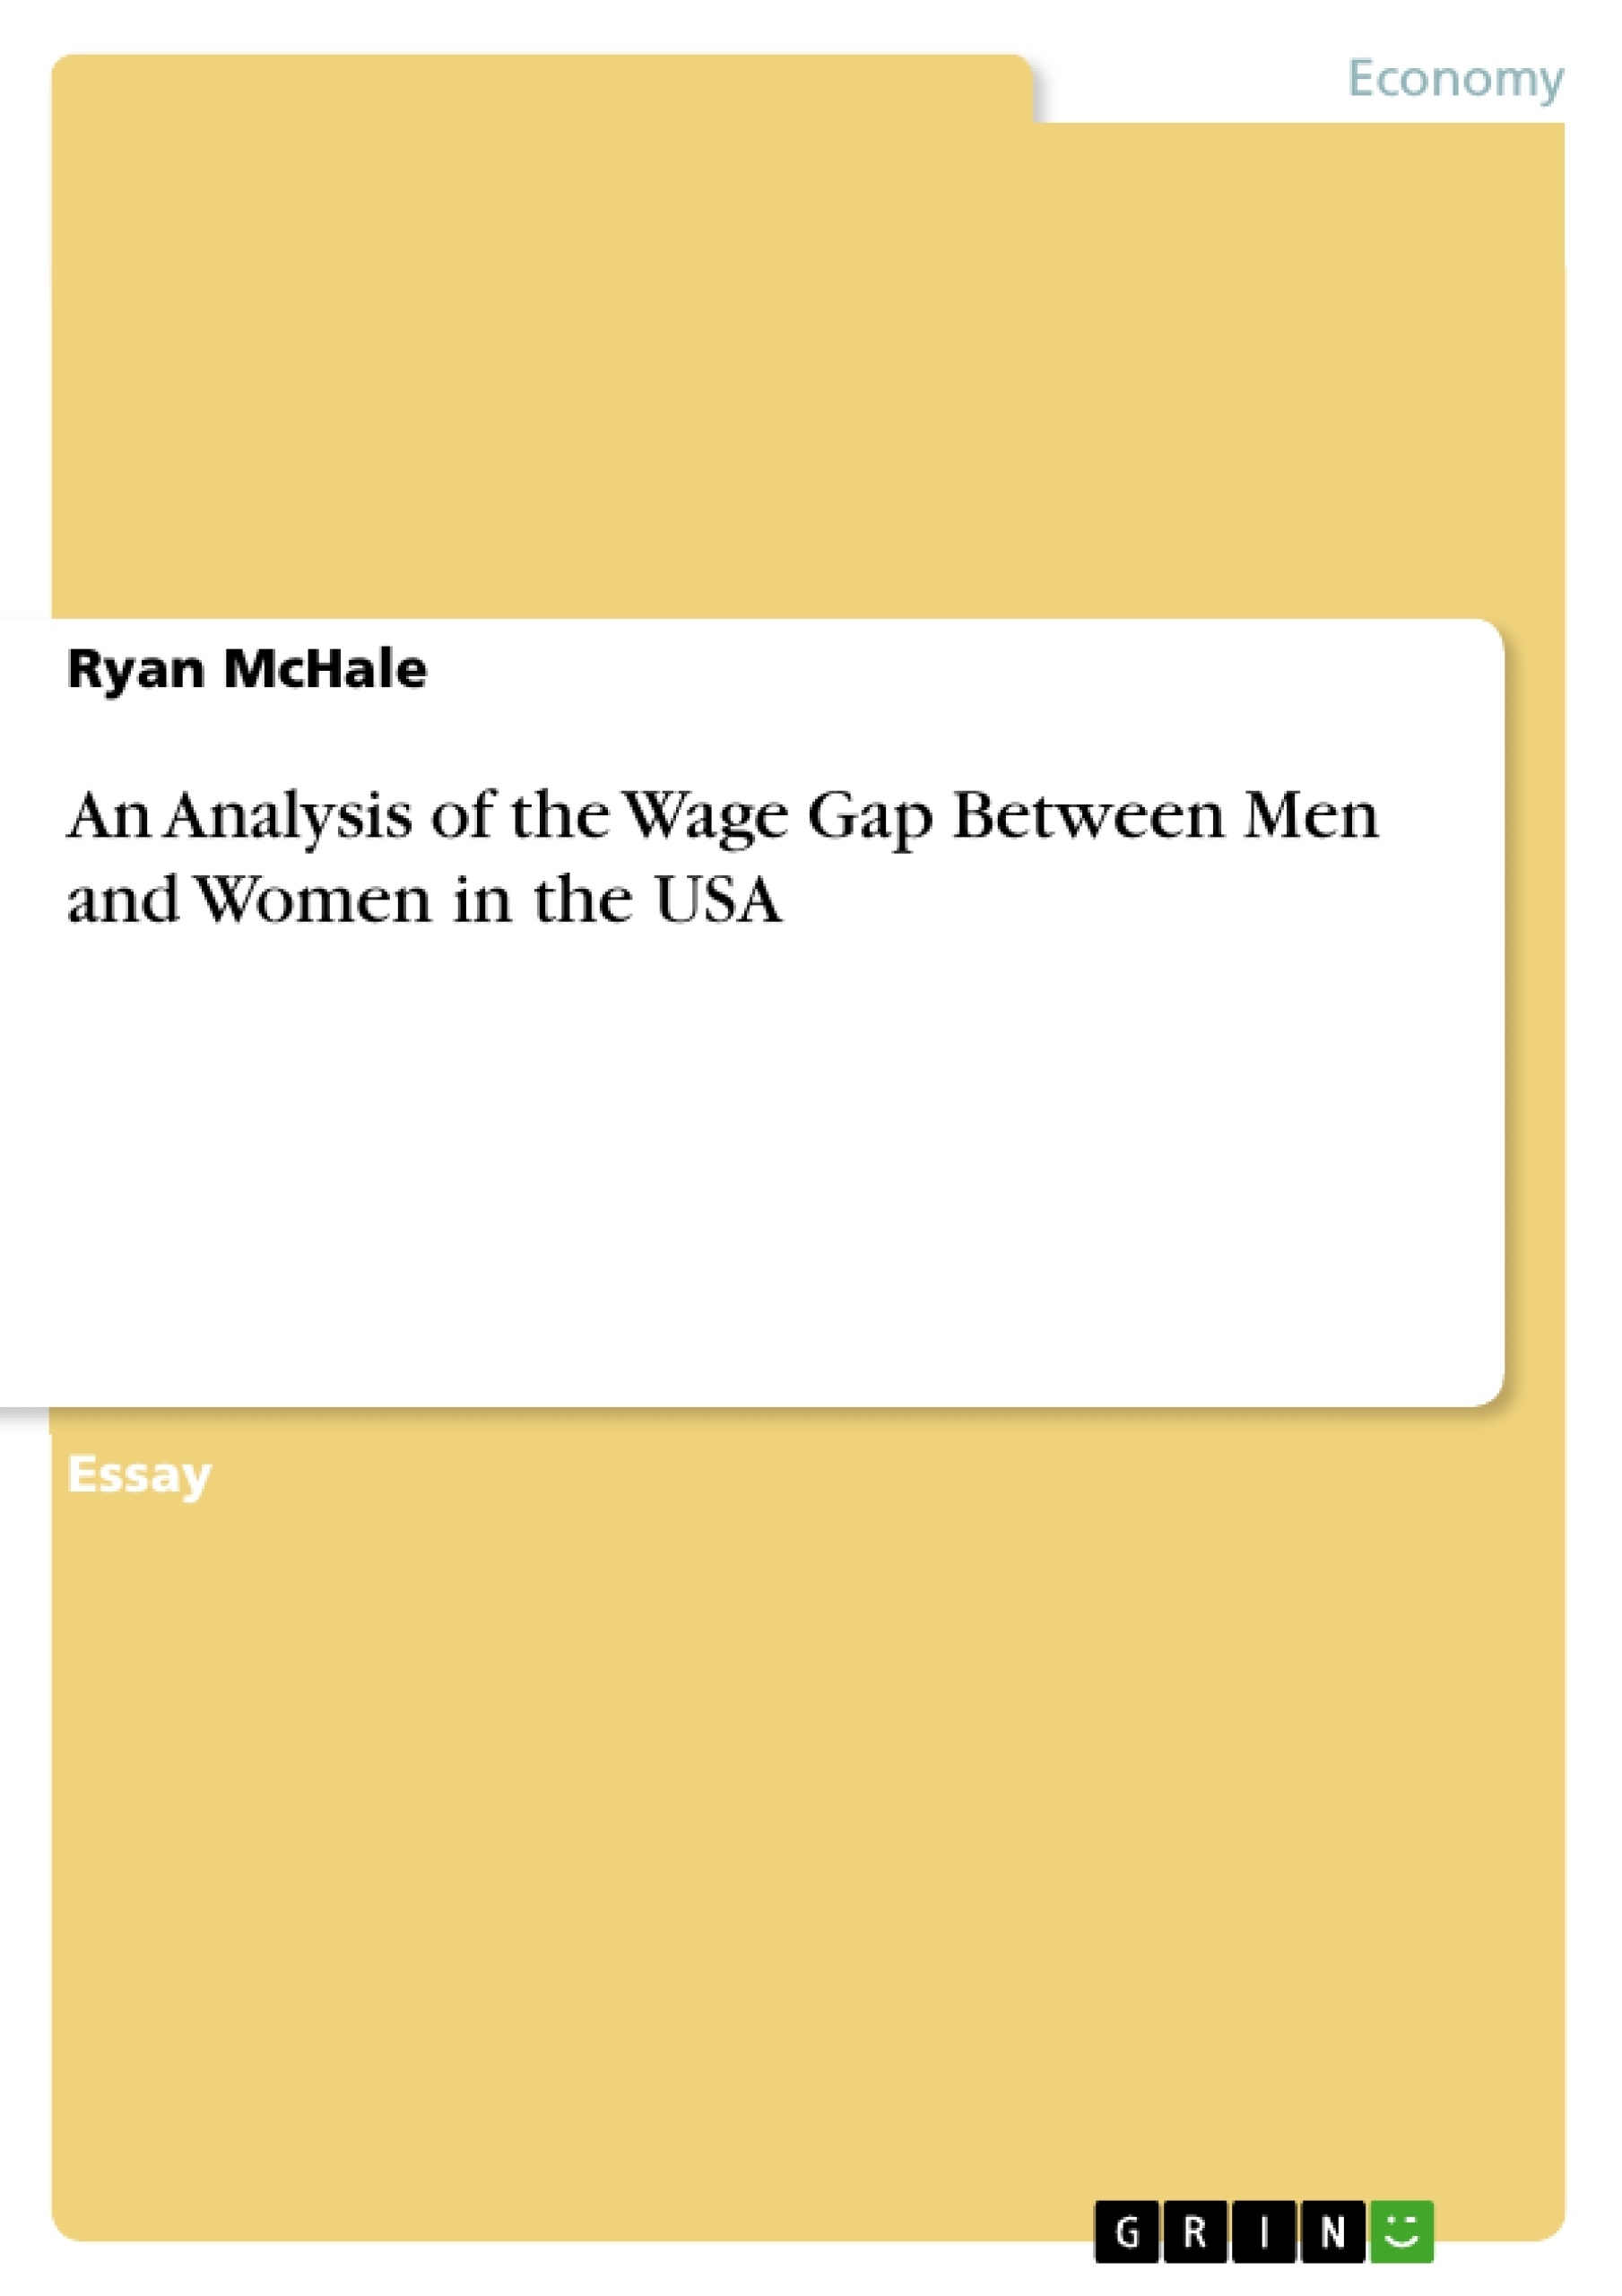 Título: An Analysis of the Wage Gap Between Men and Women in the USA